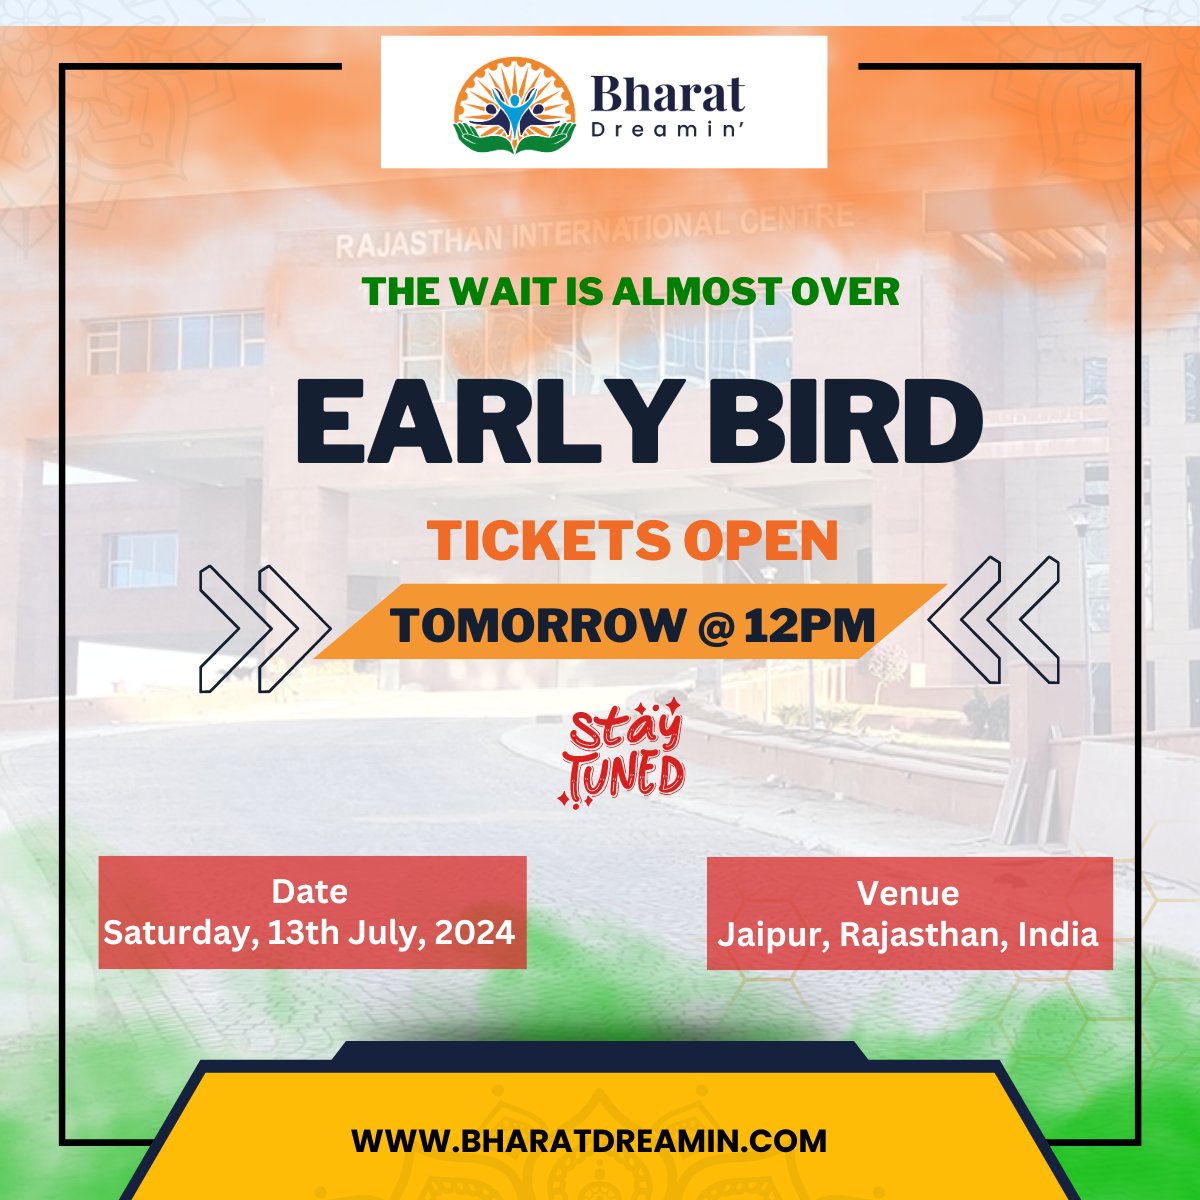 🌟 The countdown begins! 🎟️ Early bird registration opens in less than 24 hours. 🕛 Set your alarms for 12 pm tomorrow, 17/5, and be among the first to register. Tickets priced at just 599/- 🔥 Act fast, as these tickets are limited and offer nearly 60% off the regular price